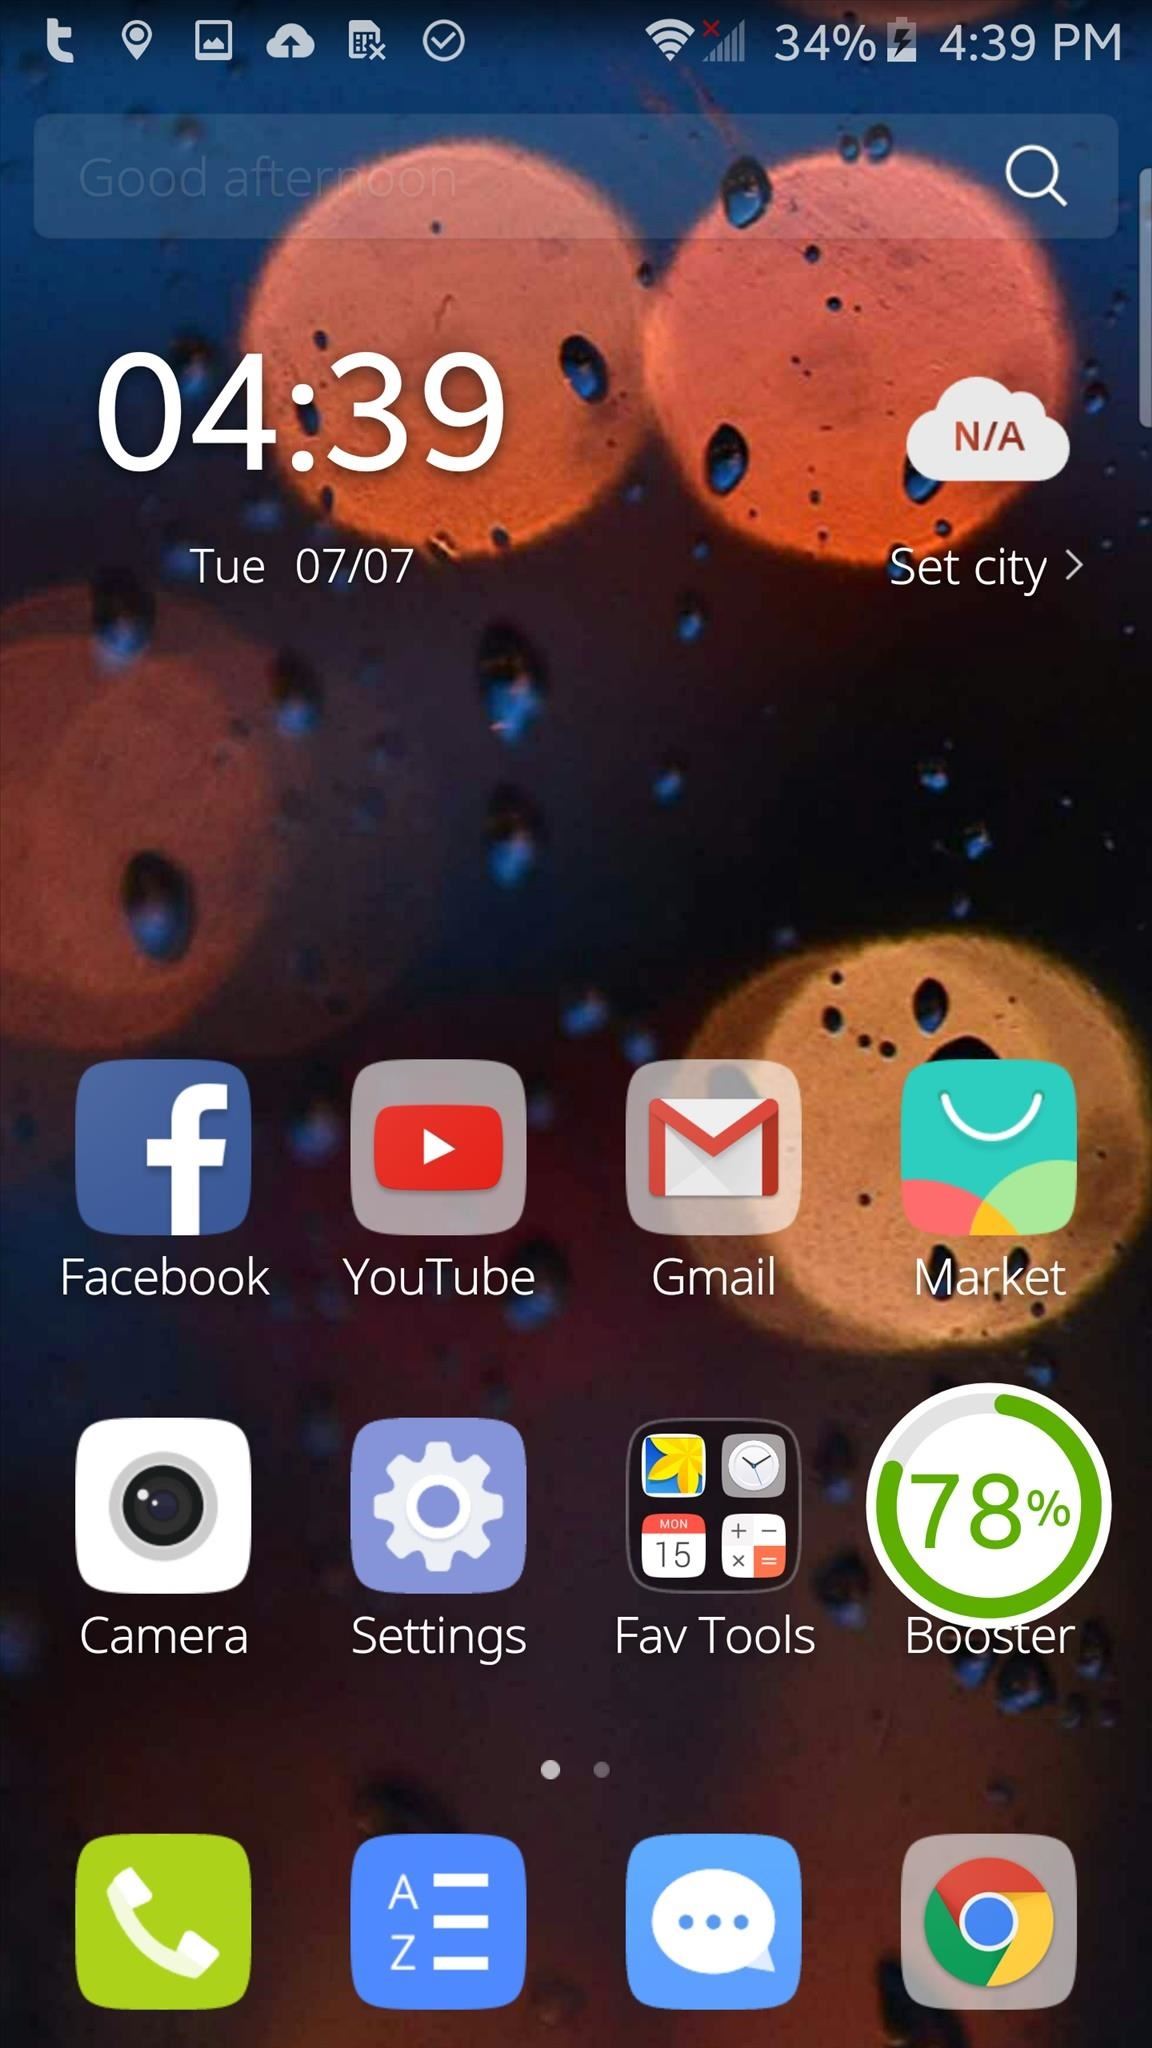 6 Unique Android Launchers That'll Get You to Ditch Your Stock Home Screen